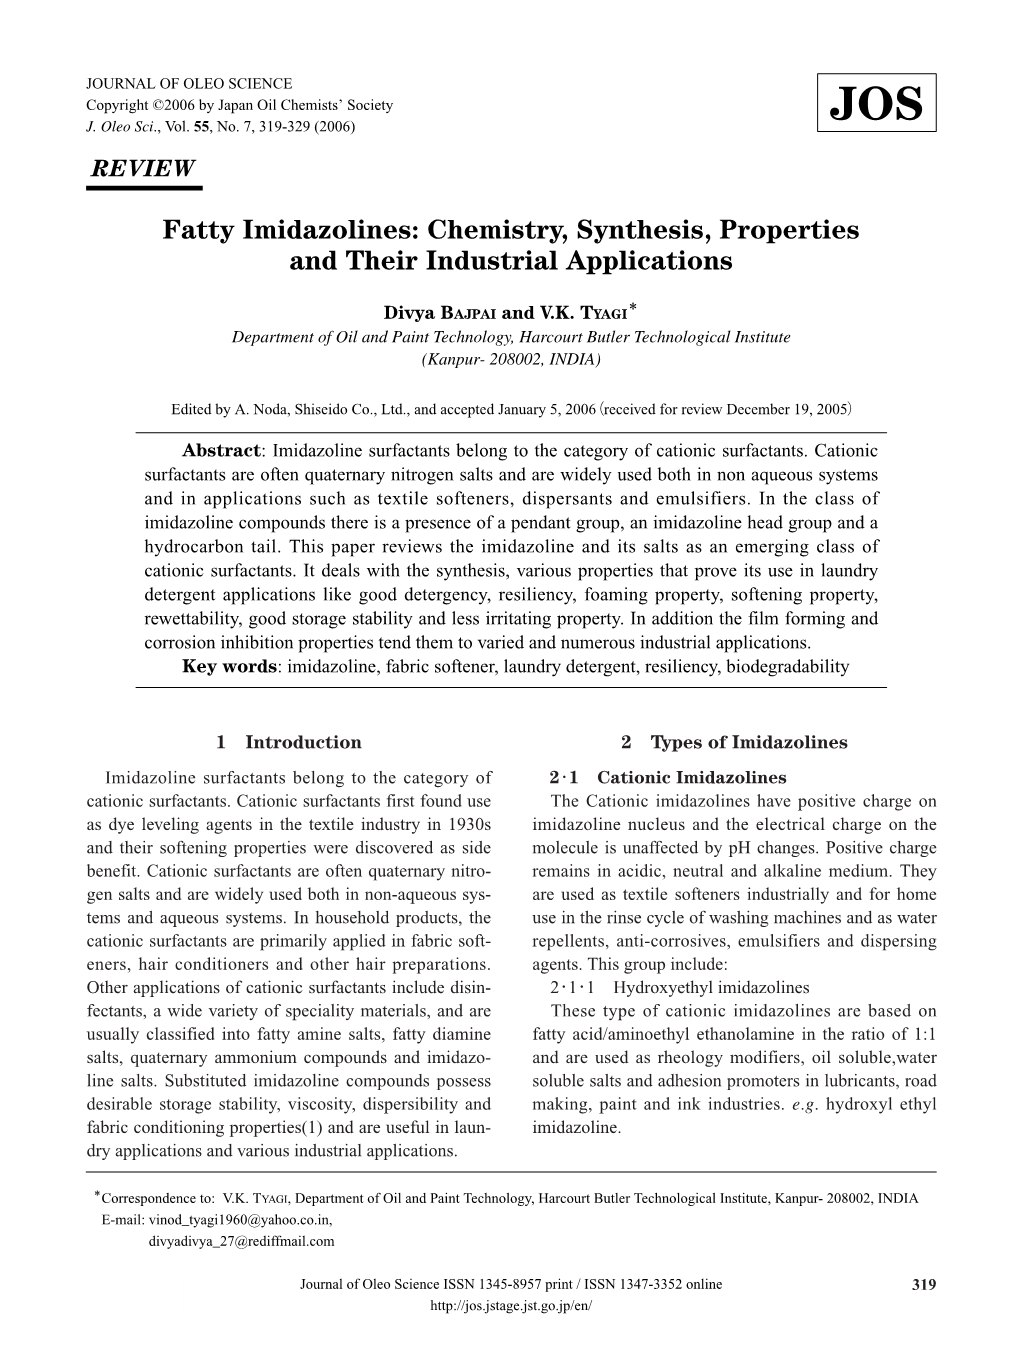 Fatty Imidazolines: Chemistry, Synthesis, Properties and Their Industrial Applications